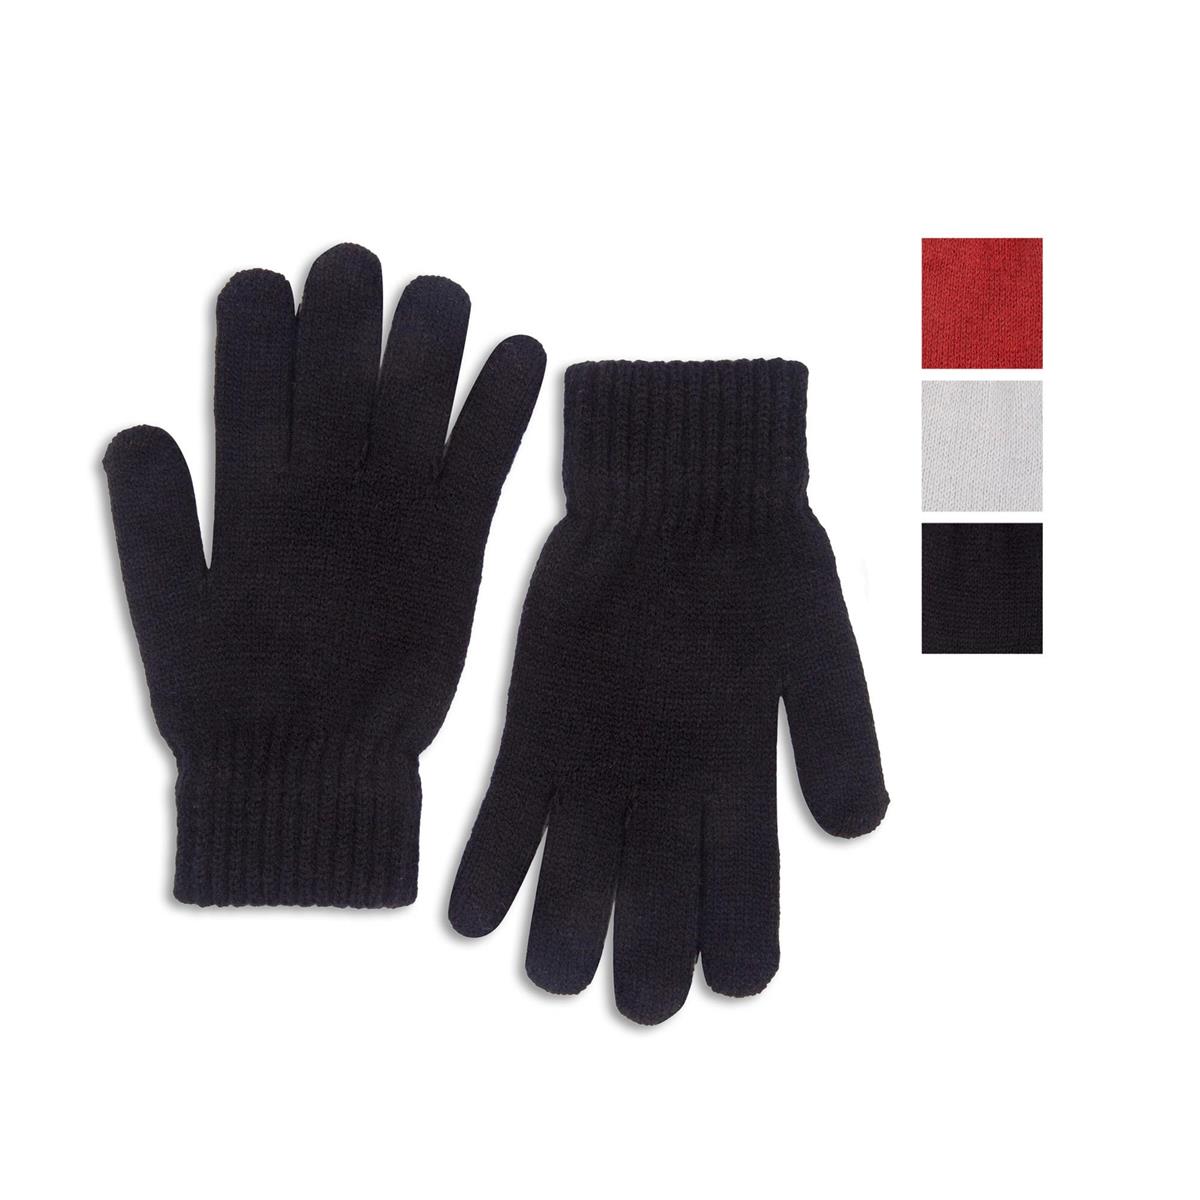 Adult Gloves & Mitts